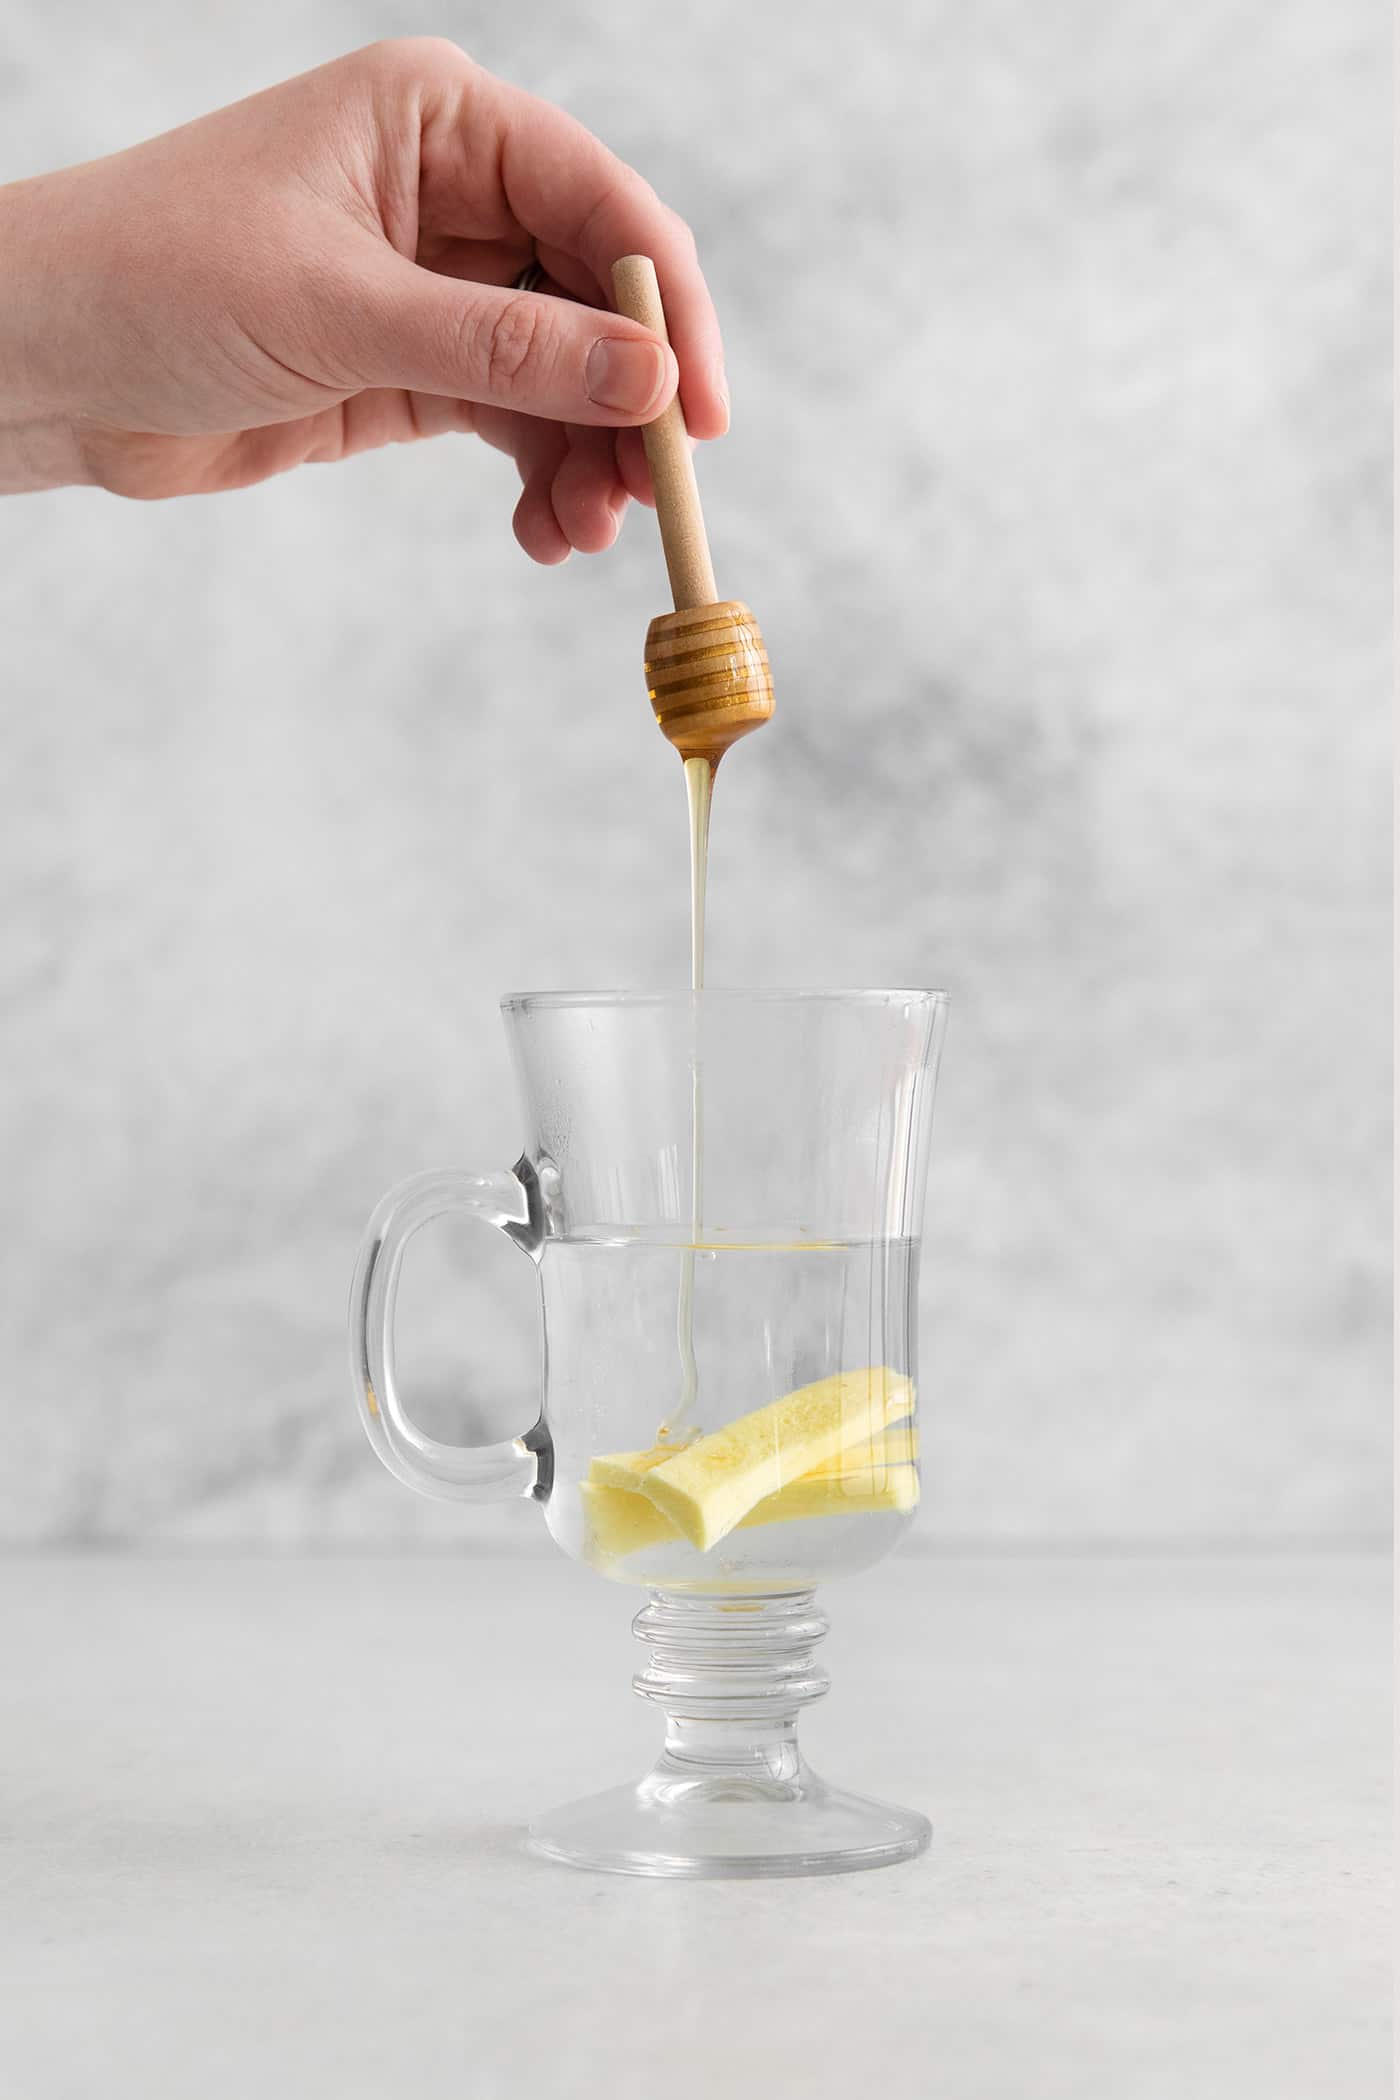 Honey being drizzled into a mug with hot water and ginger